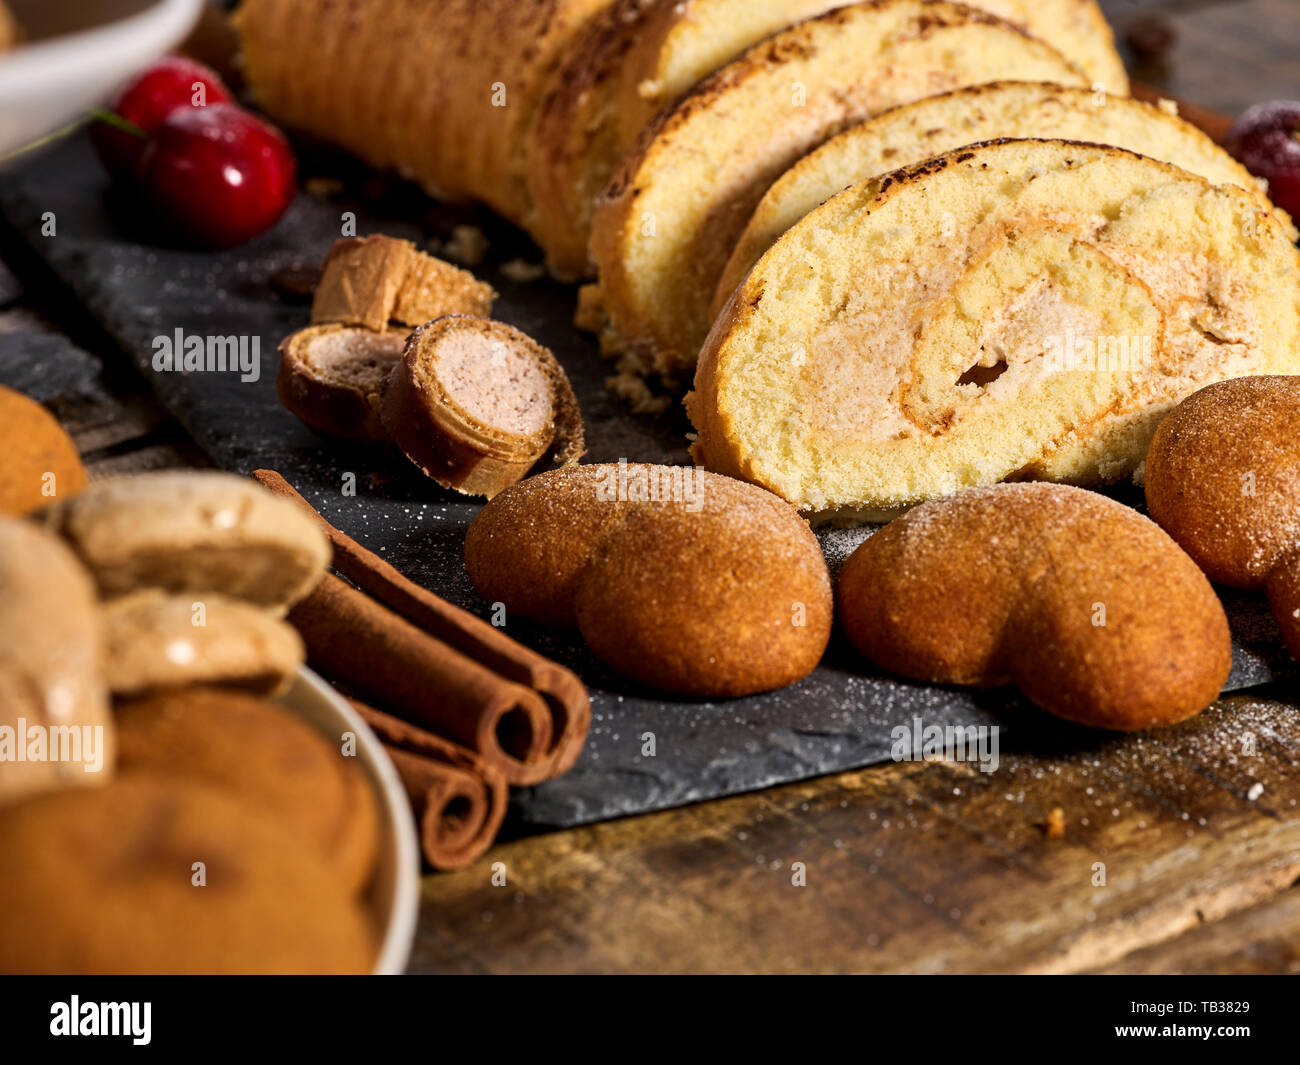 Sand cookies heart shape, rolled cake with cherry, cinnamon stick Stock Photo